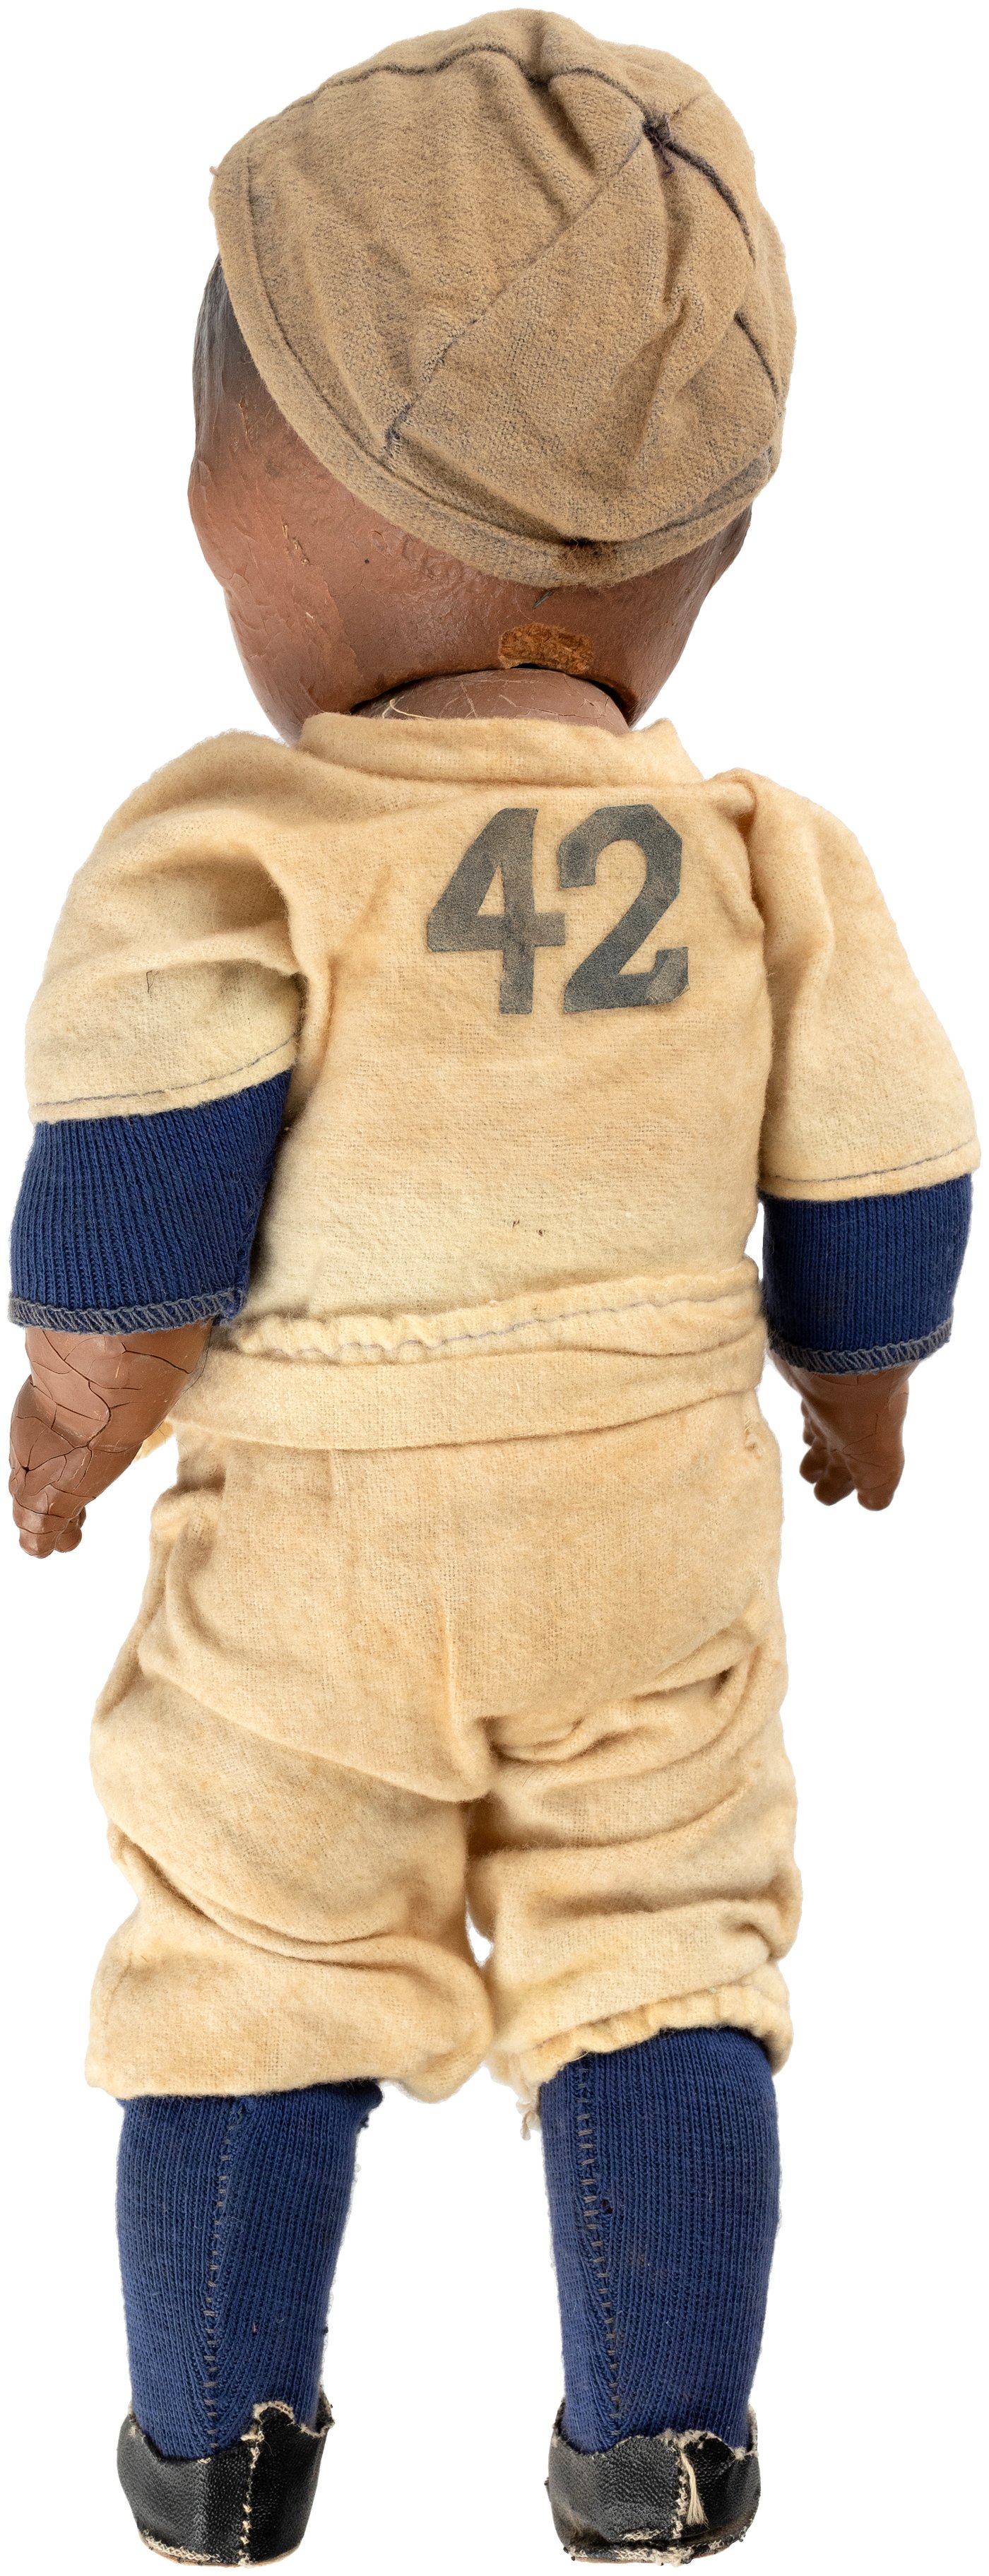 Hake's - JACKIE ROBINSON DODGERS COMPOSITION DOLL WITH ORIGINAL TAG.